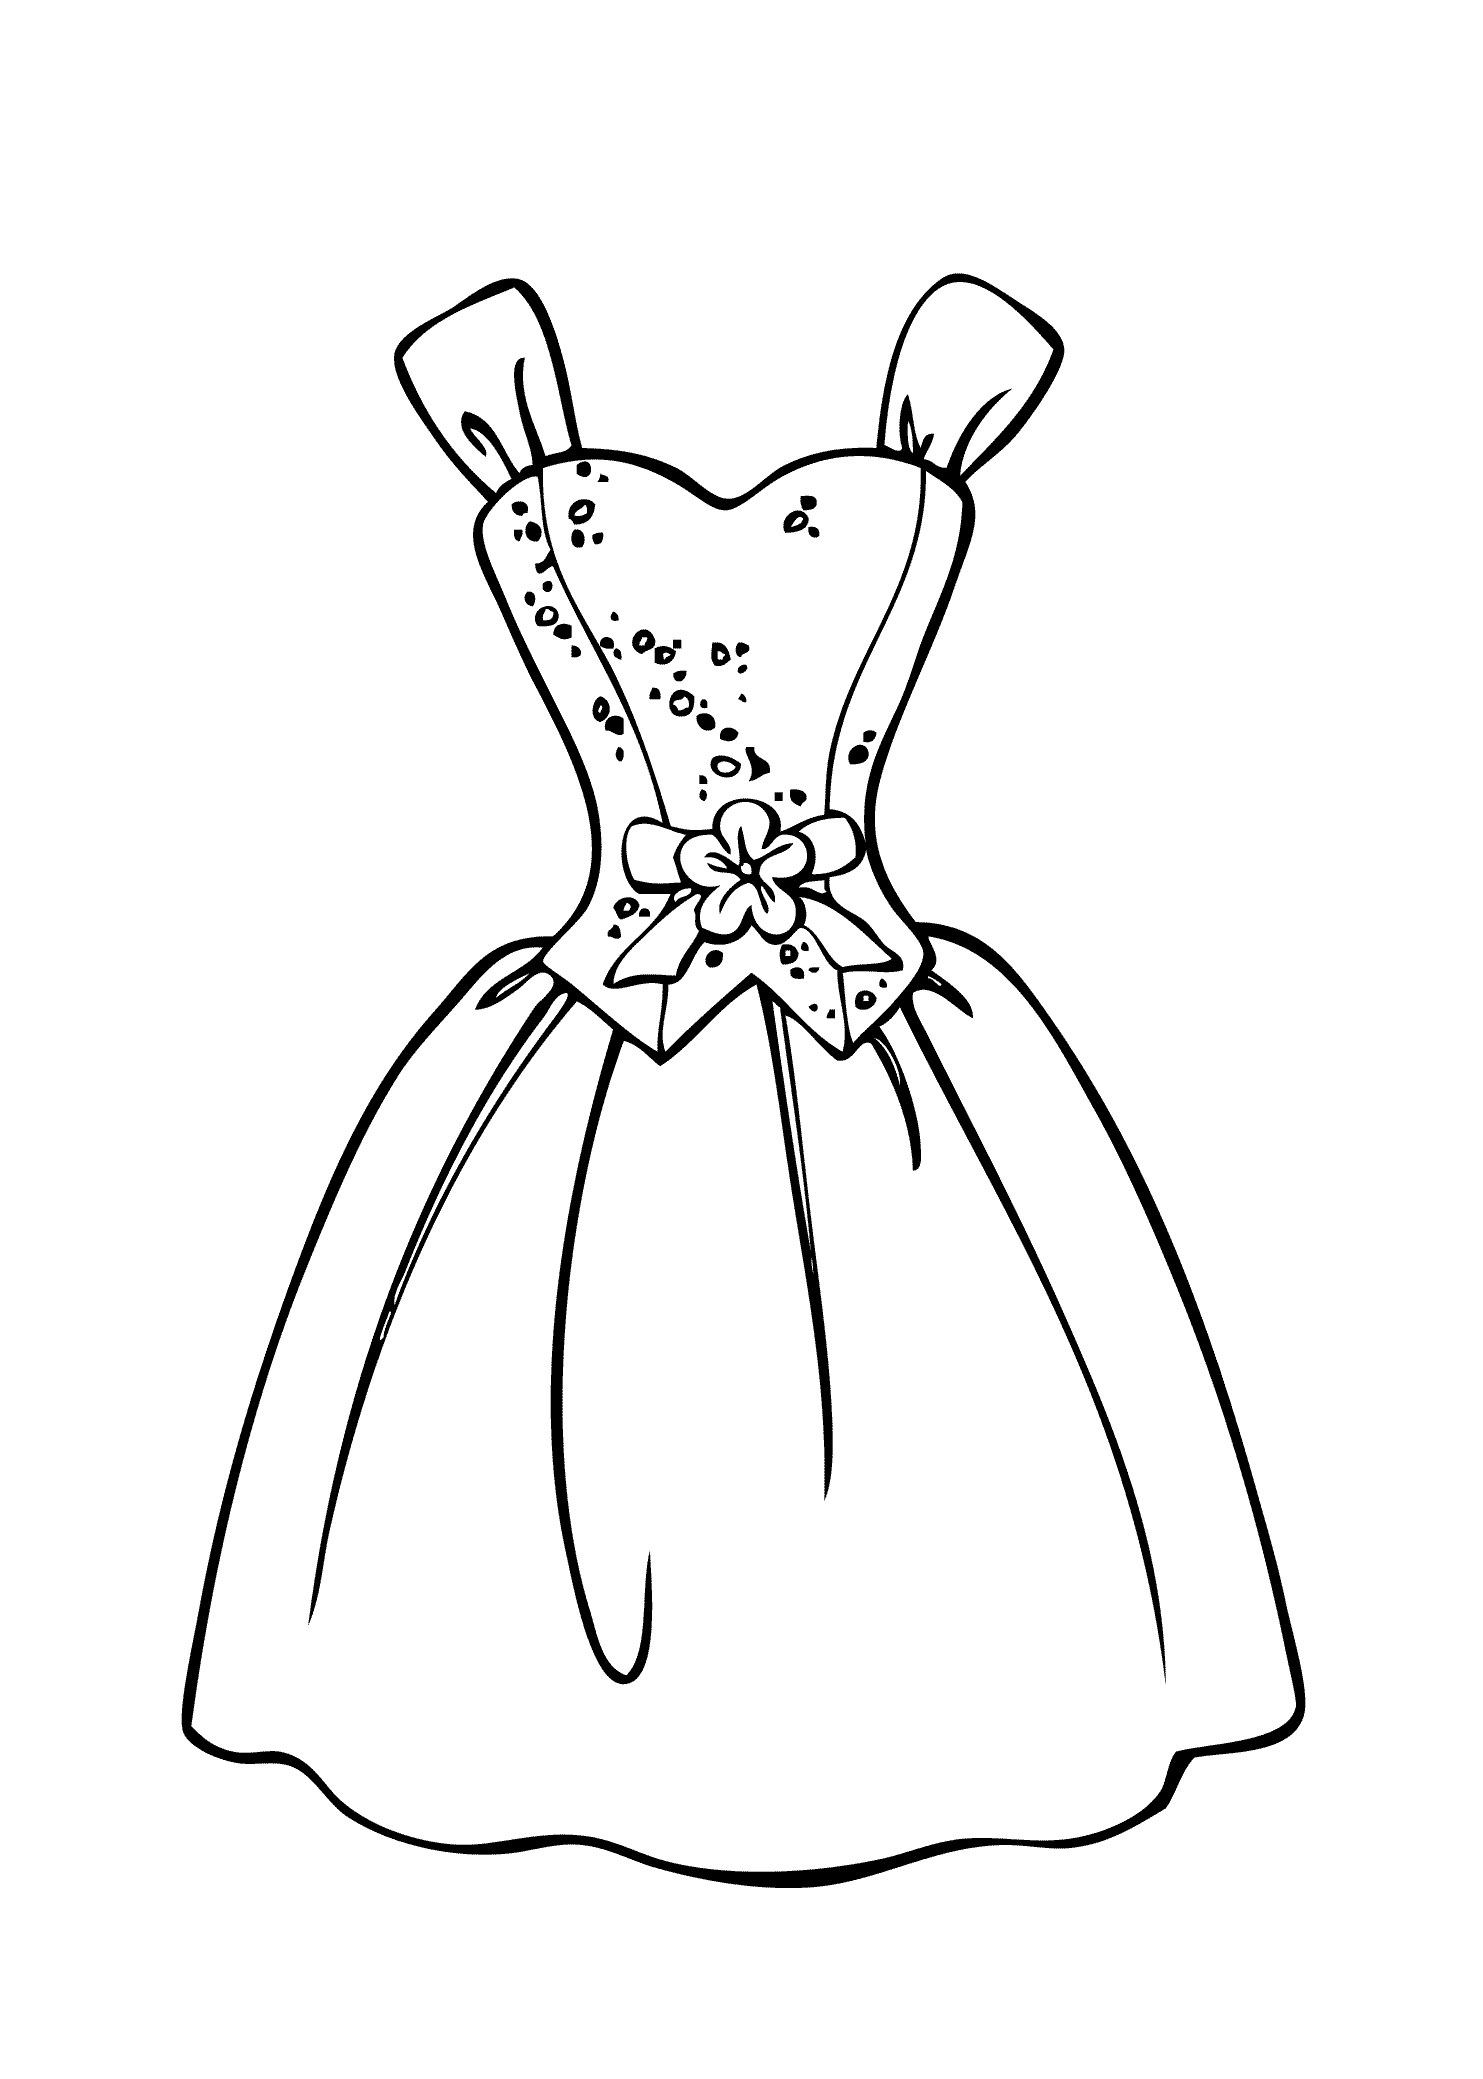 5 Beautiful Girls in a Gown Coloring Pages Blank Dress Page Coloring 2021 09 Coloring4free